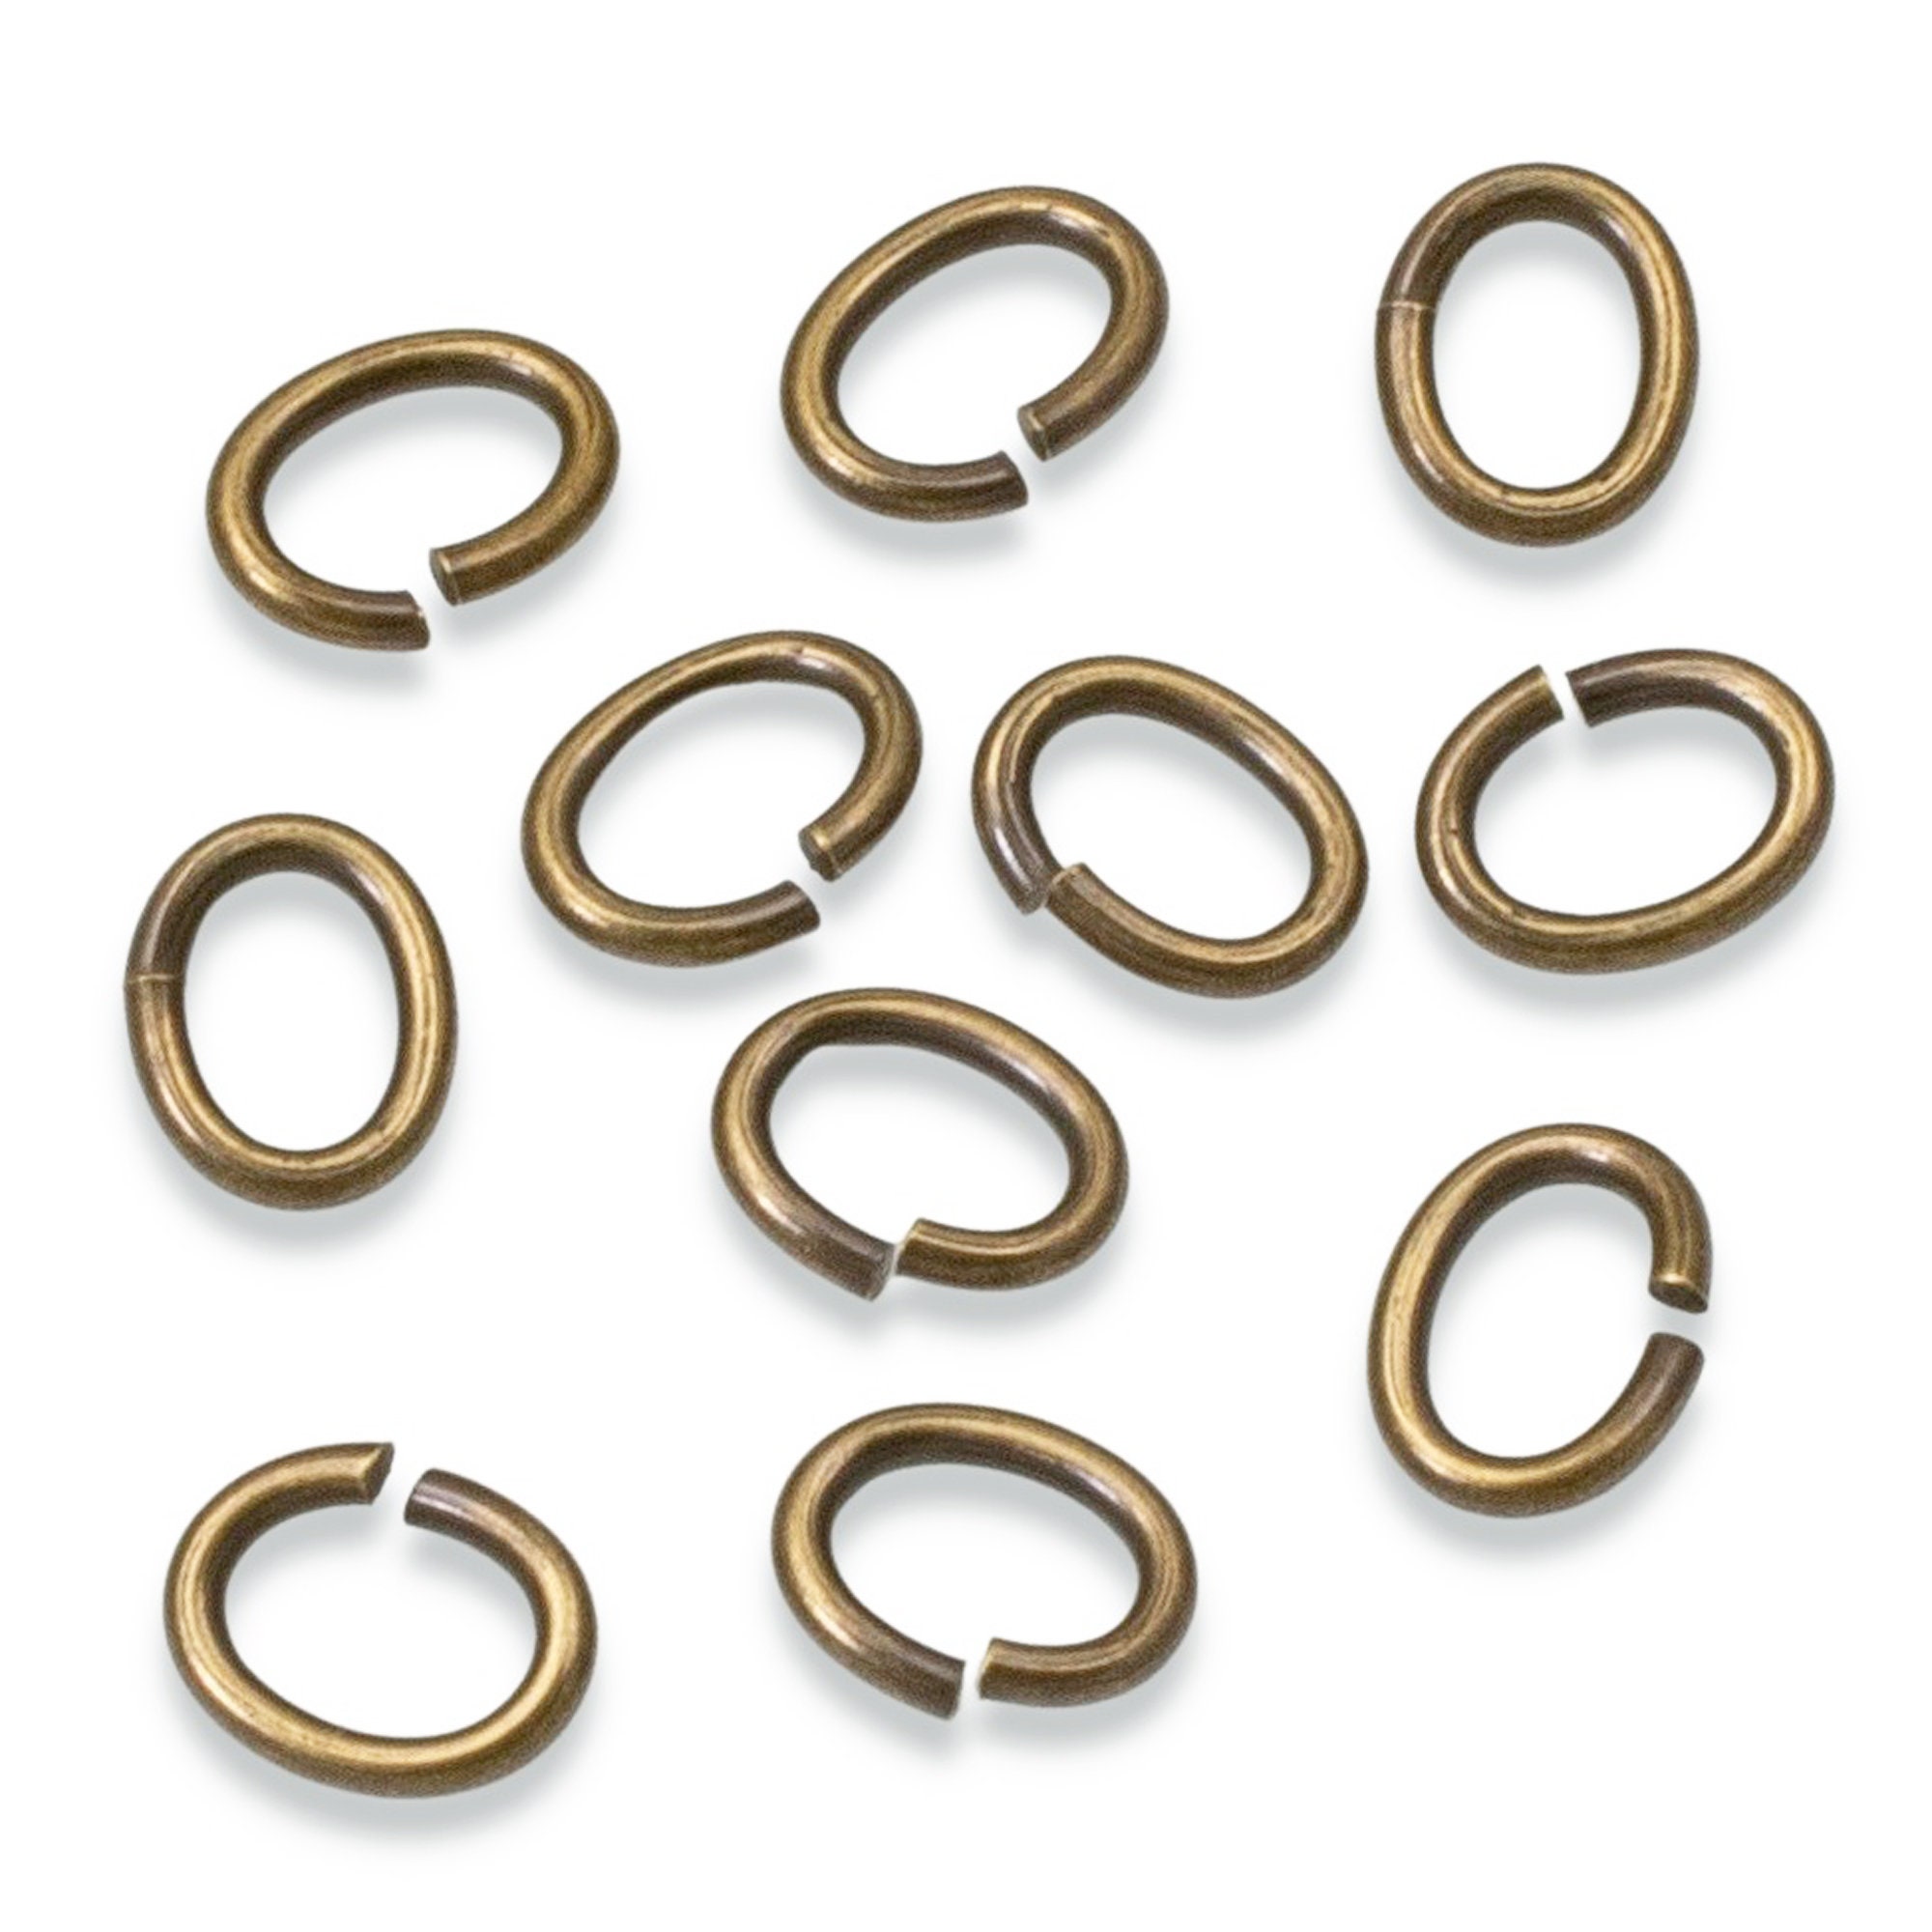 144 Pieces Heavy Weight 6mm 18 Gauge Base Metal Open Jump Ring Charm Links Jewelry  Making Supplies Metal Findings 